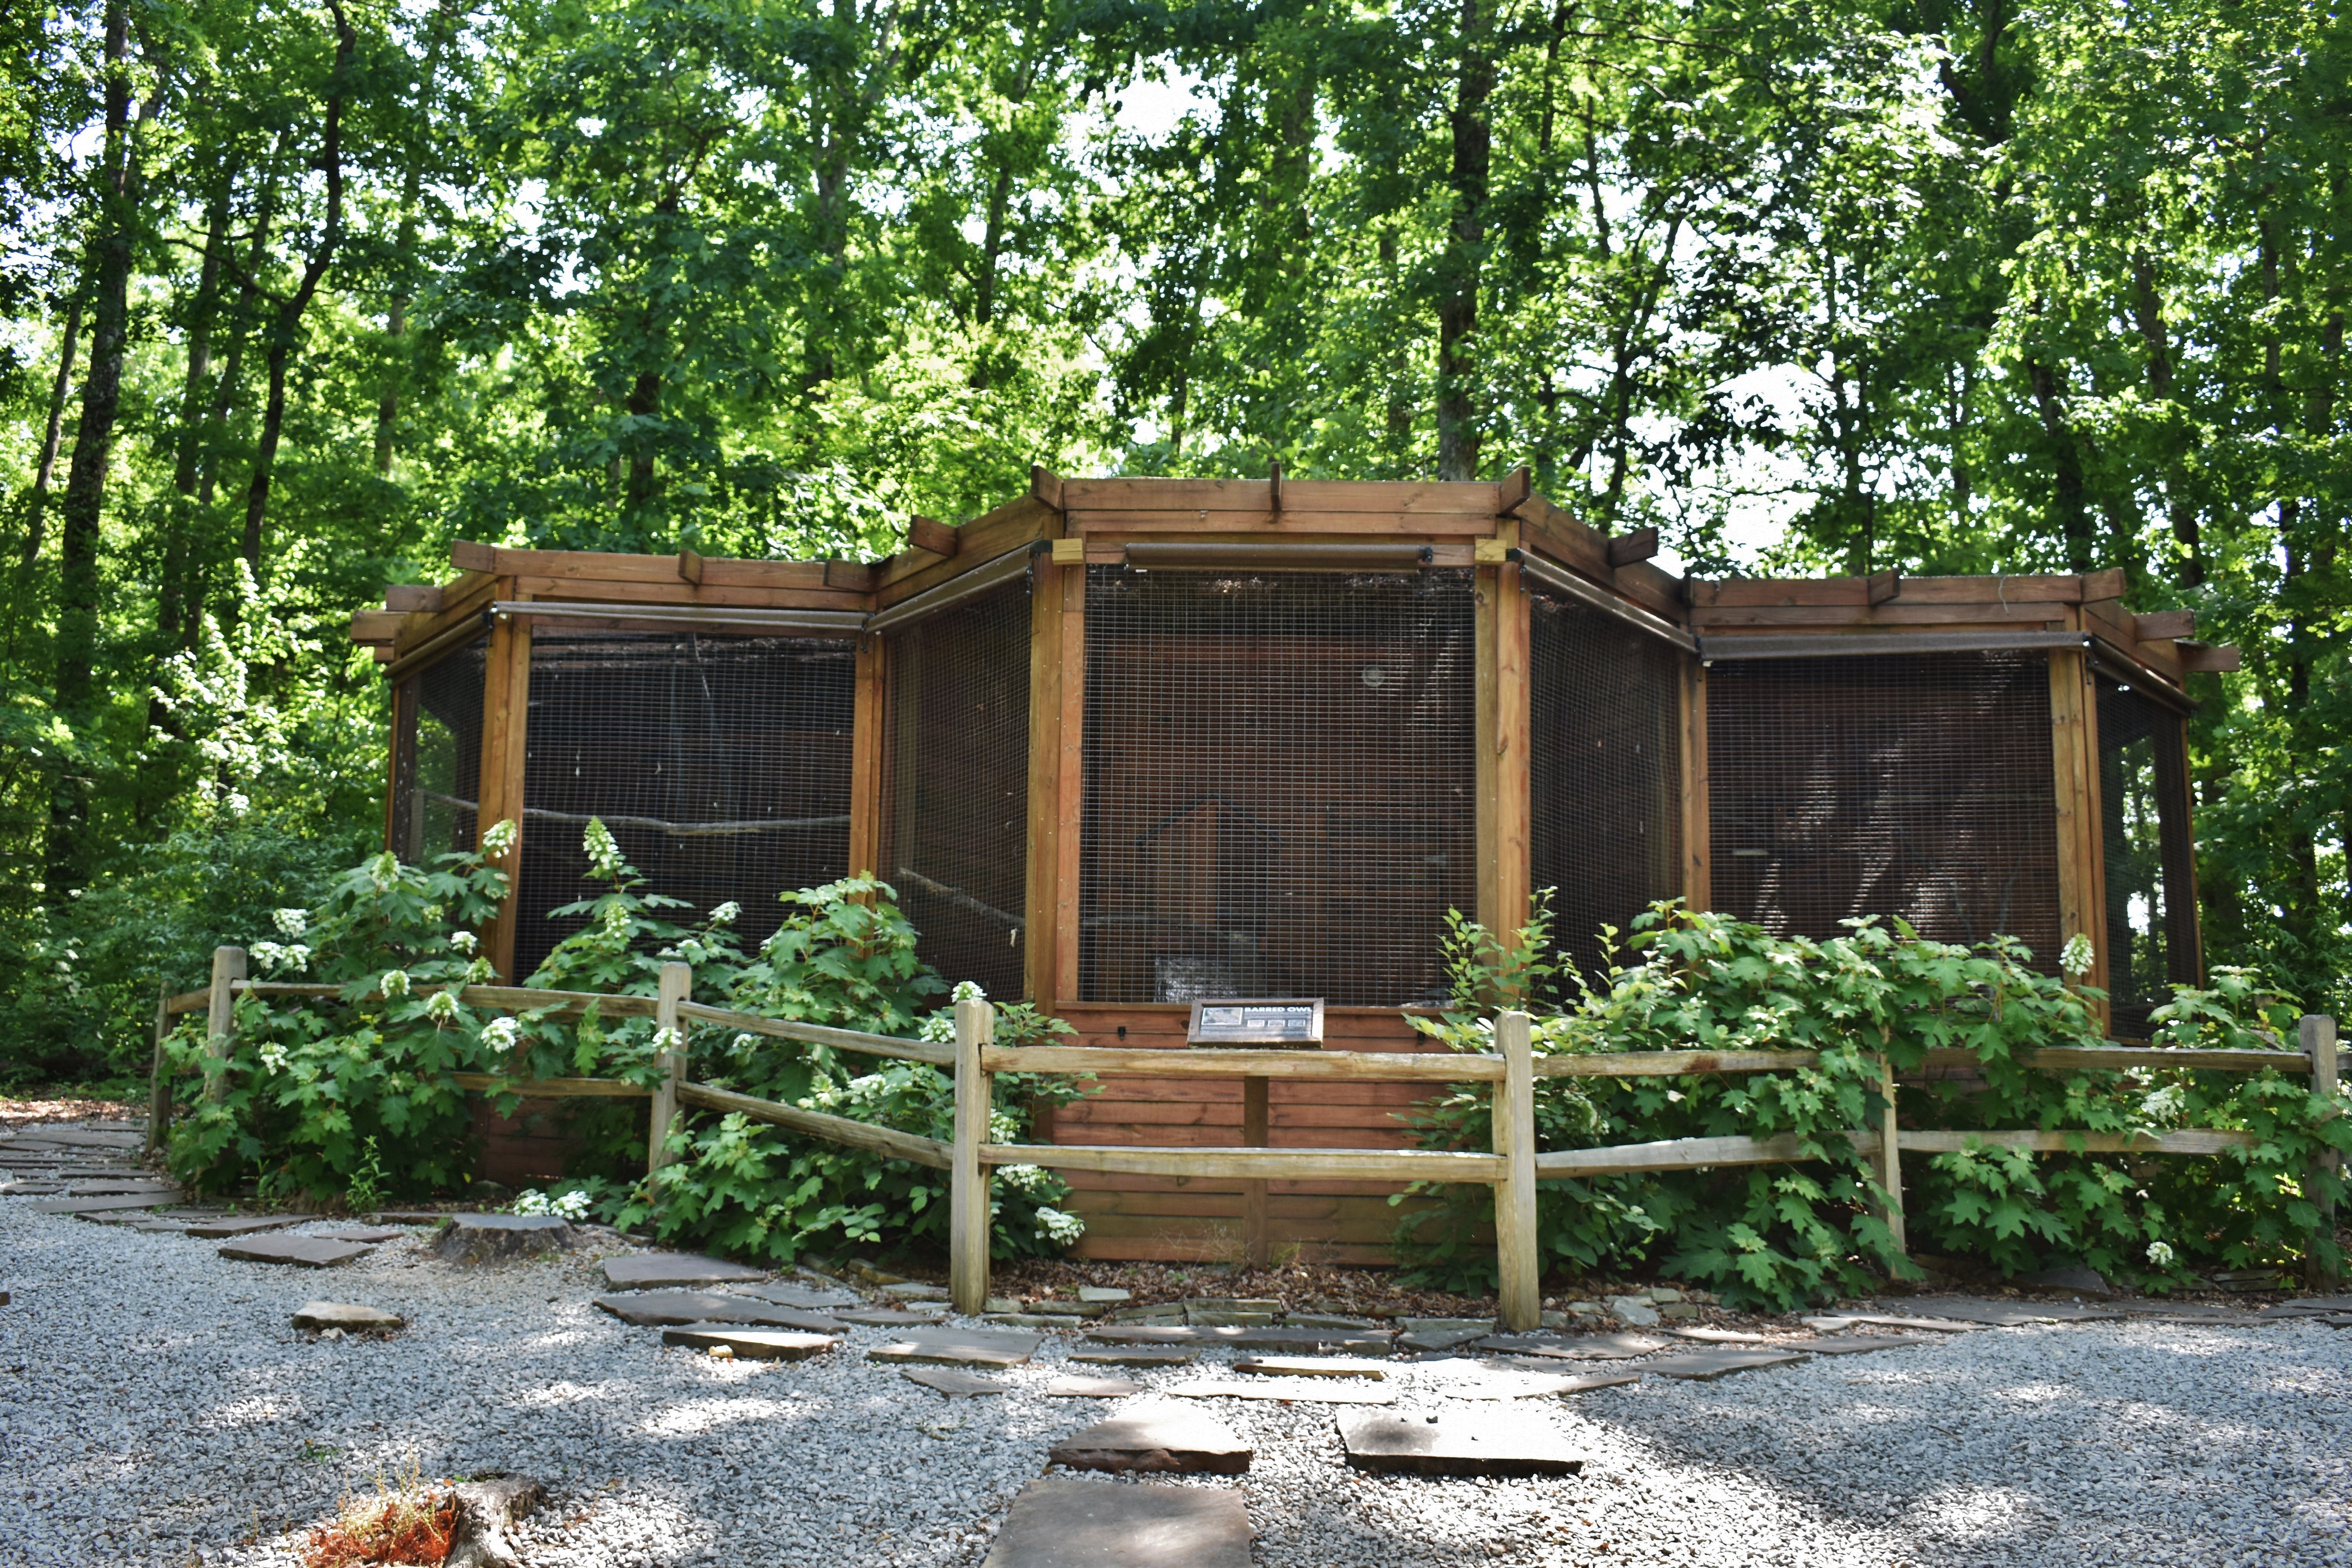 There is a small aviary at the campground.